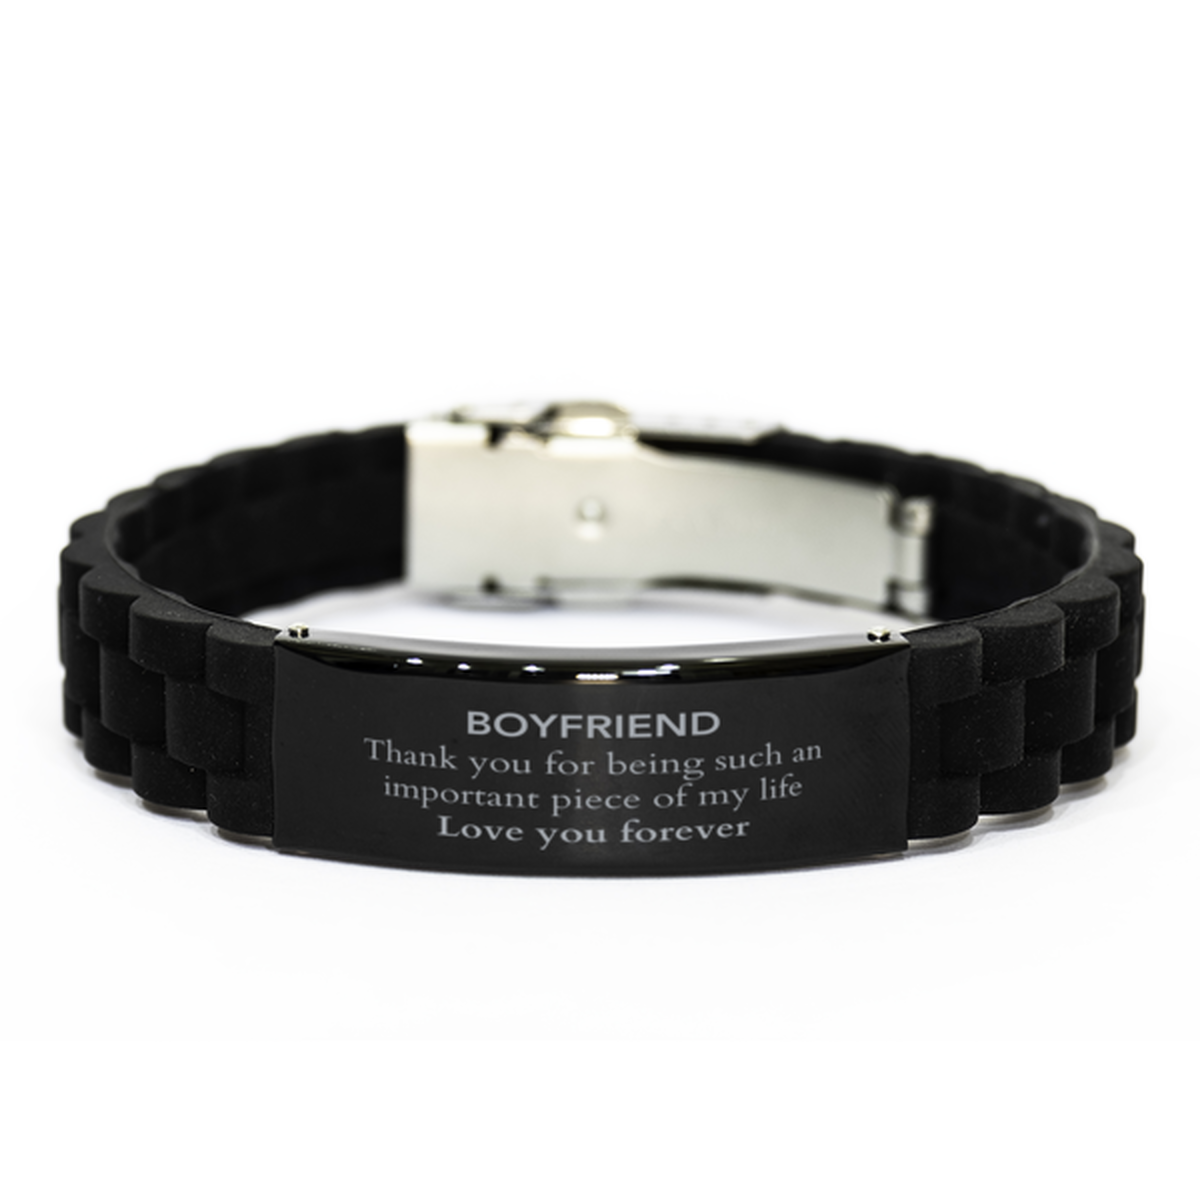 Appropriate Boyfriend Black Glidelock Clasp Bracelet Epic Birthday Gifts for Boyfriend Thank you for being such an important piece of my life Boyfriend Christmas Mothers Fathers Day